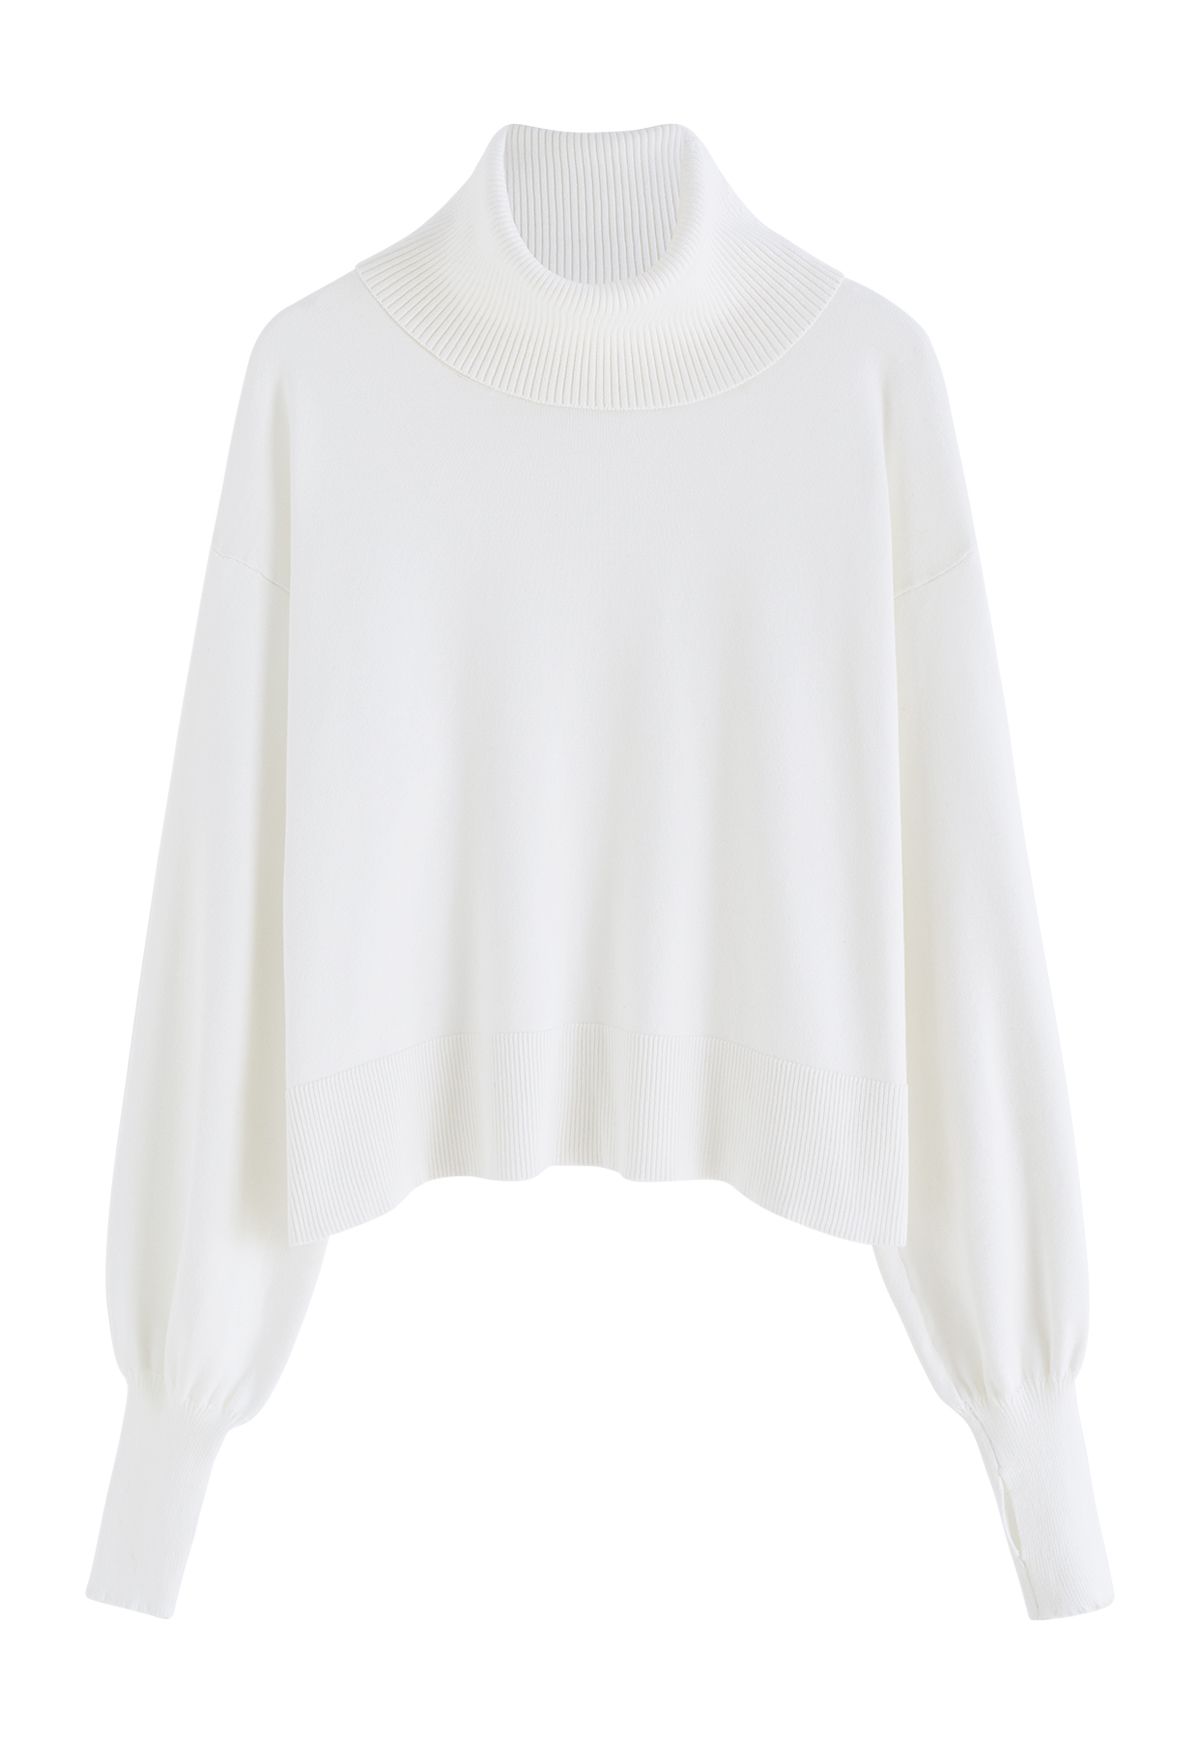 Turtleneck Side Buttons Slouchy Knit Top in White